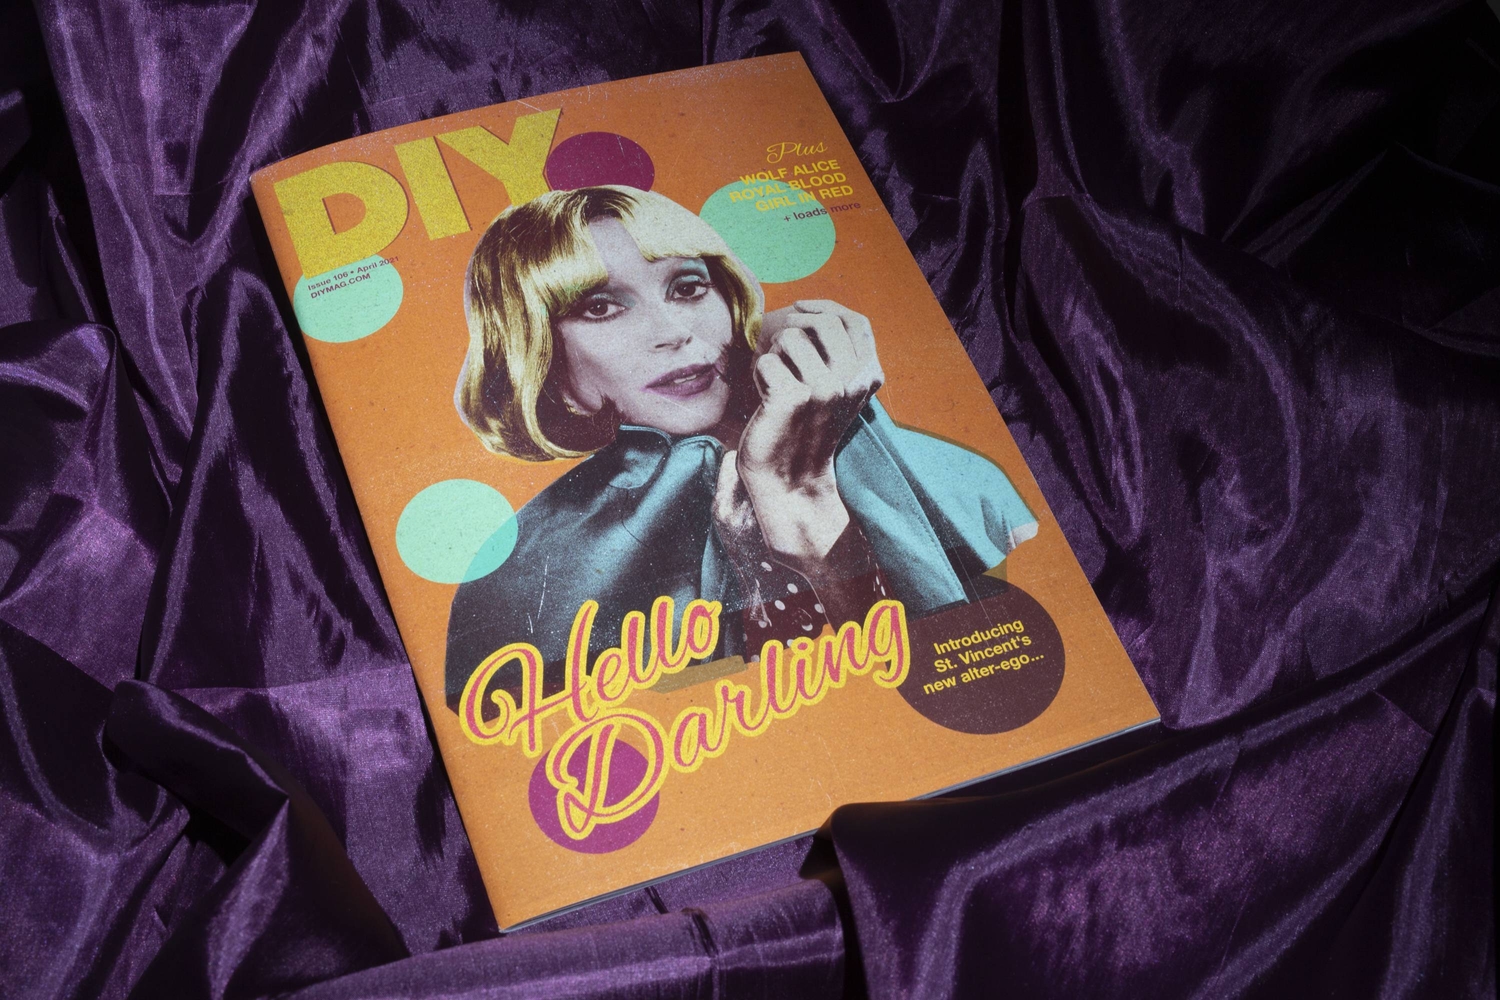 DIY’s April 2021 issue - feat. St. Vincent, Royal Blood, Wolf Alice & more - is out now!